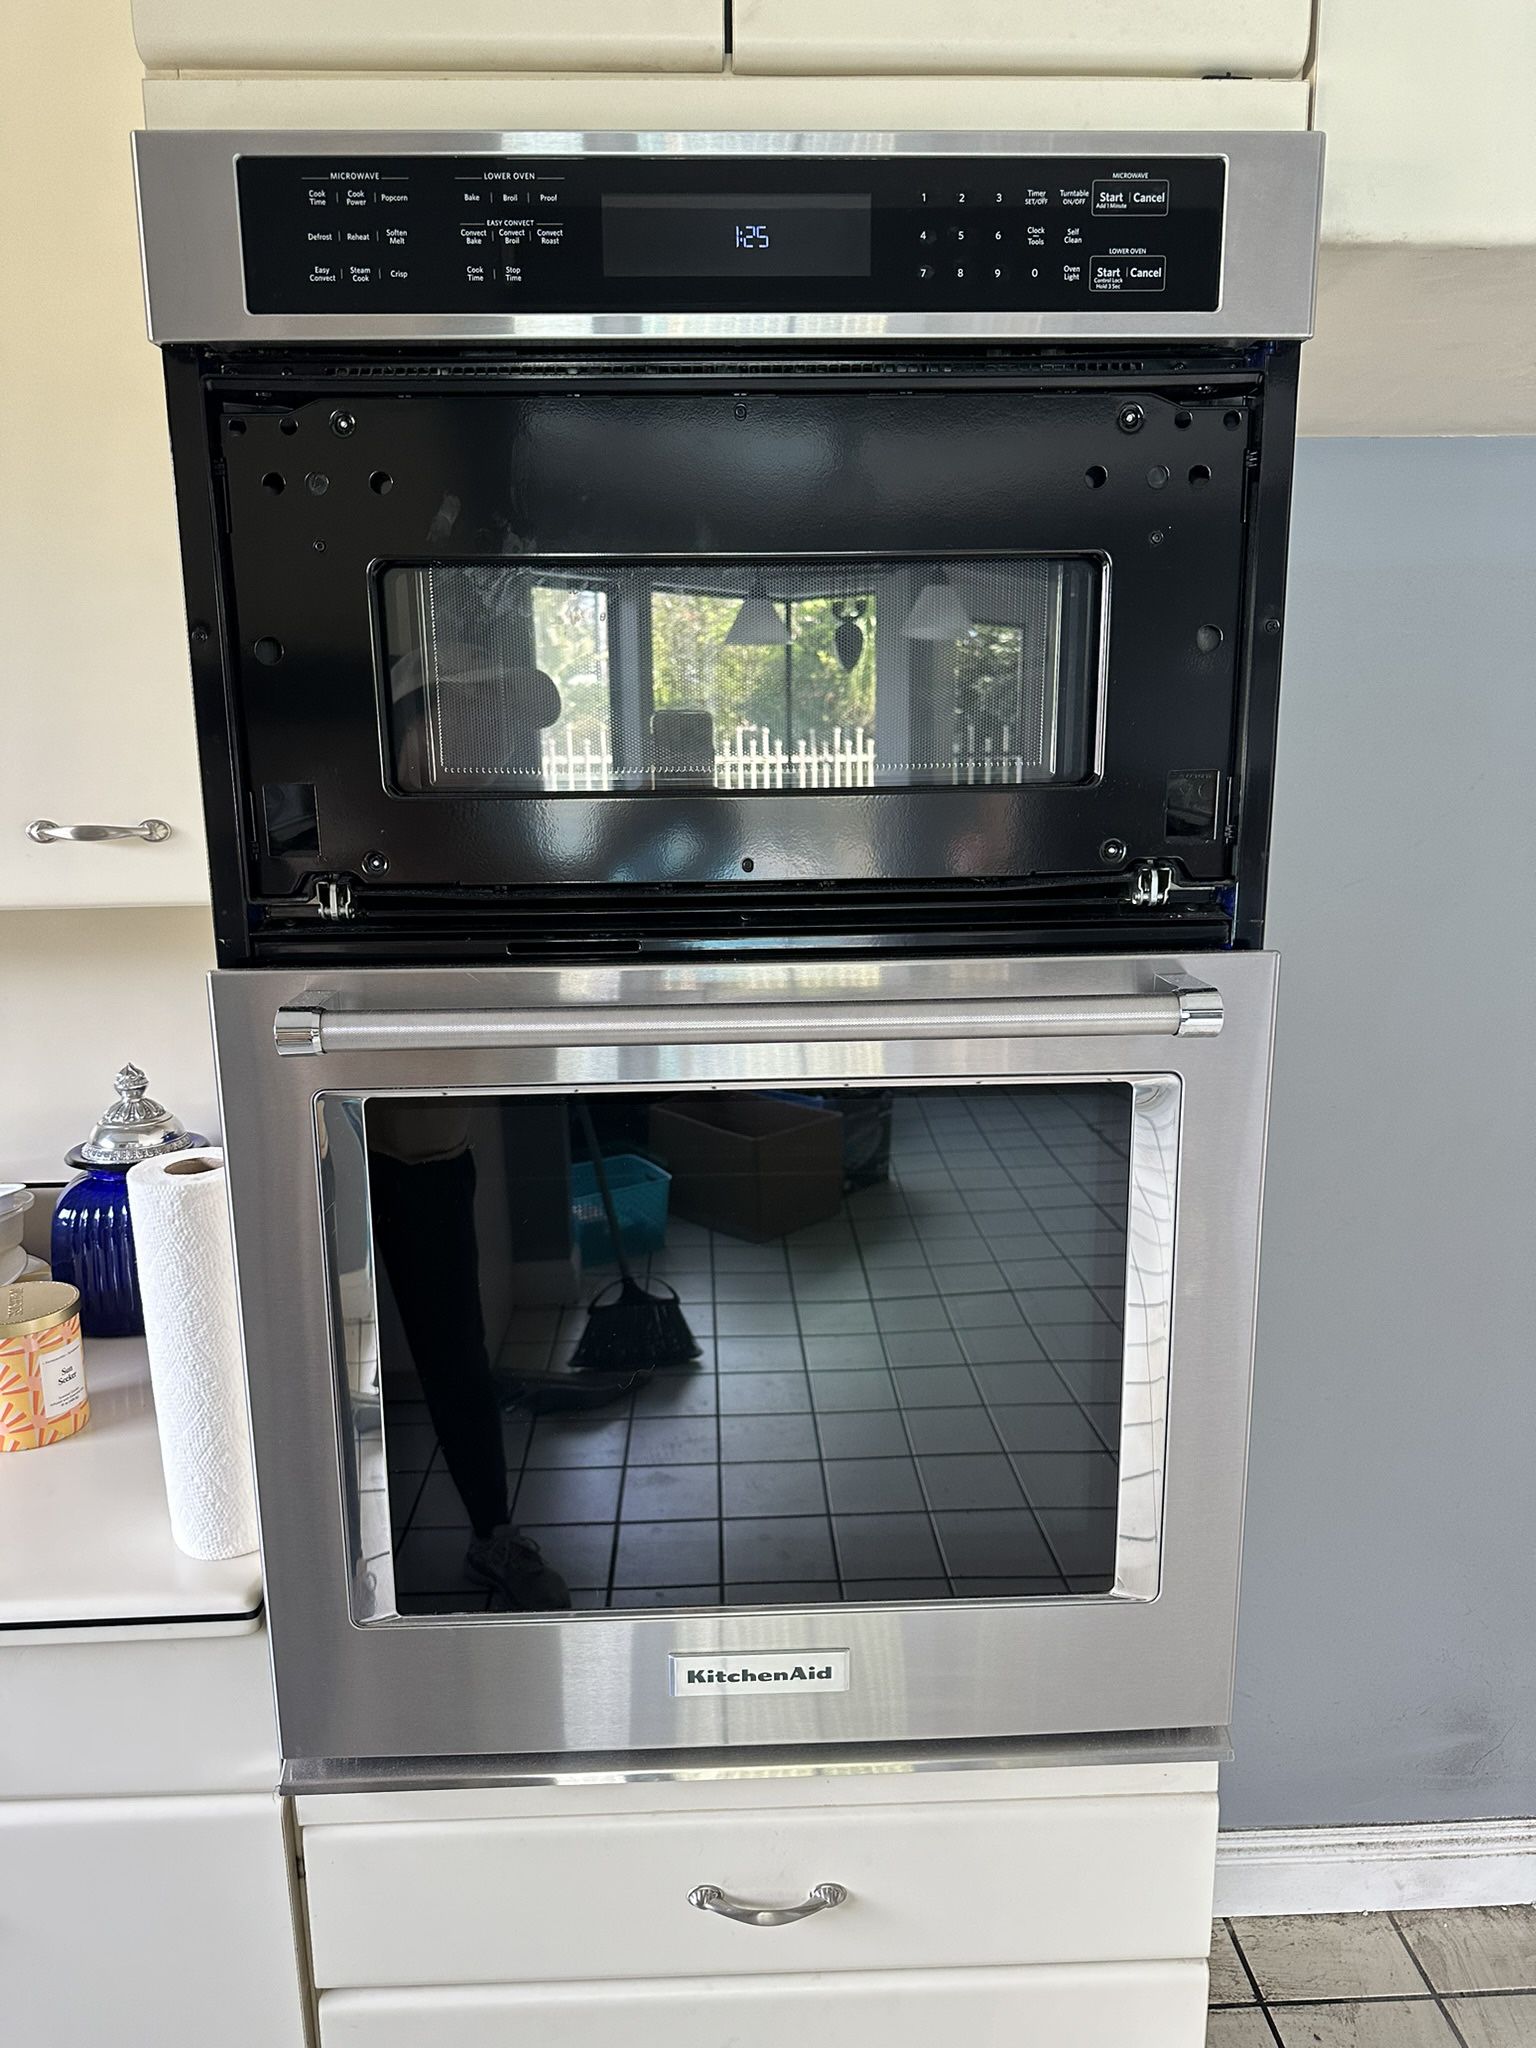 Microwave, Convention, Oven Set